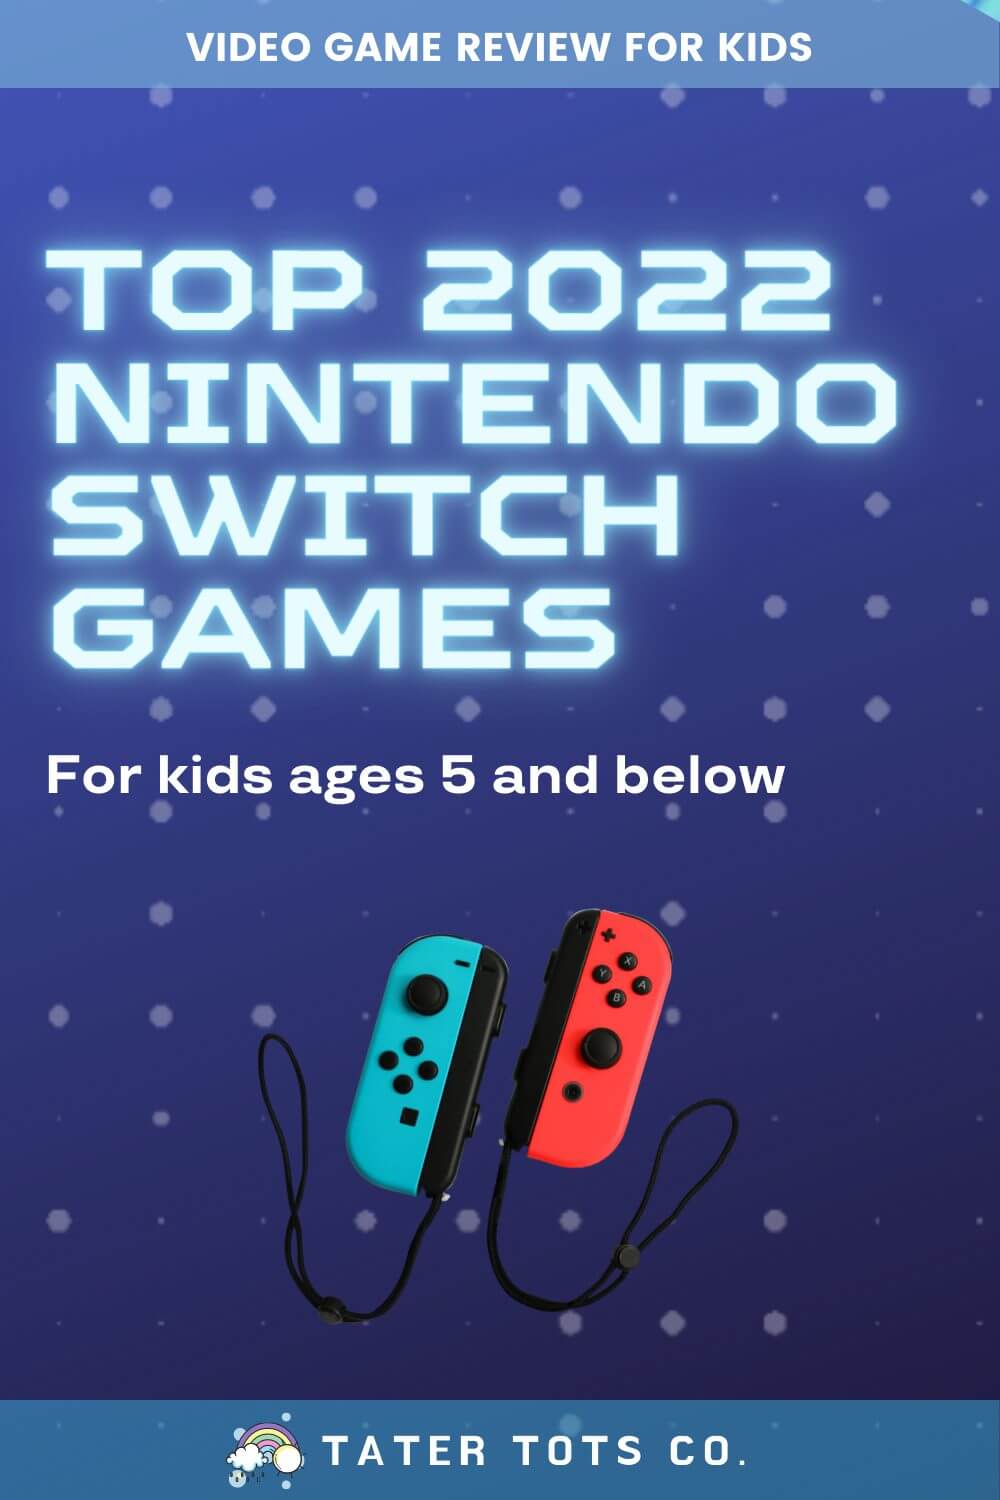 The Best Nintendo Switch Games For Kids In 2022 - GameSpot